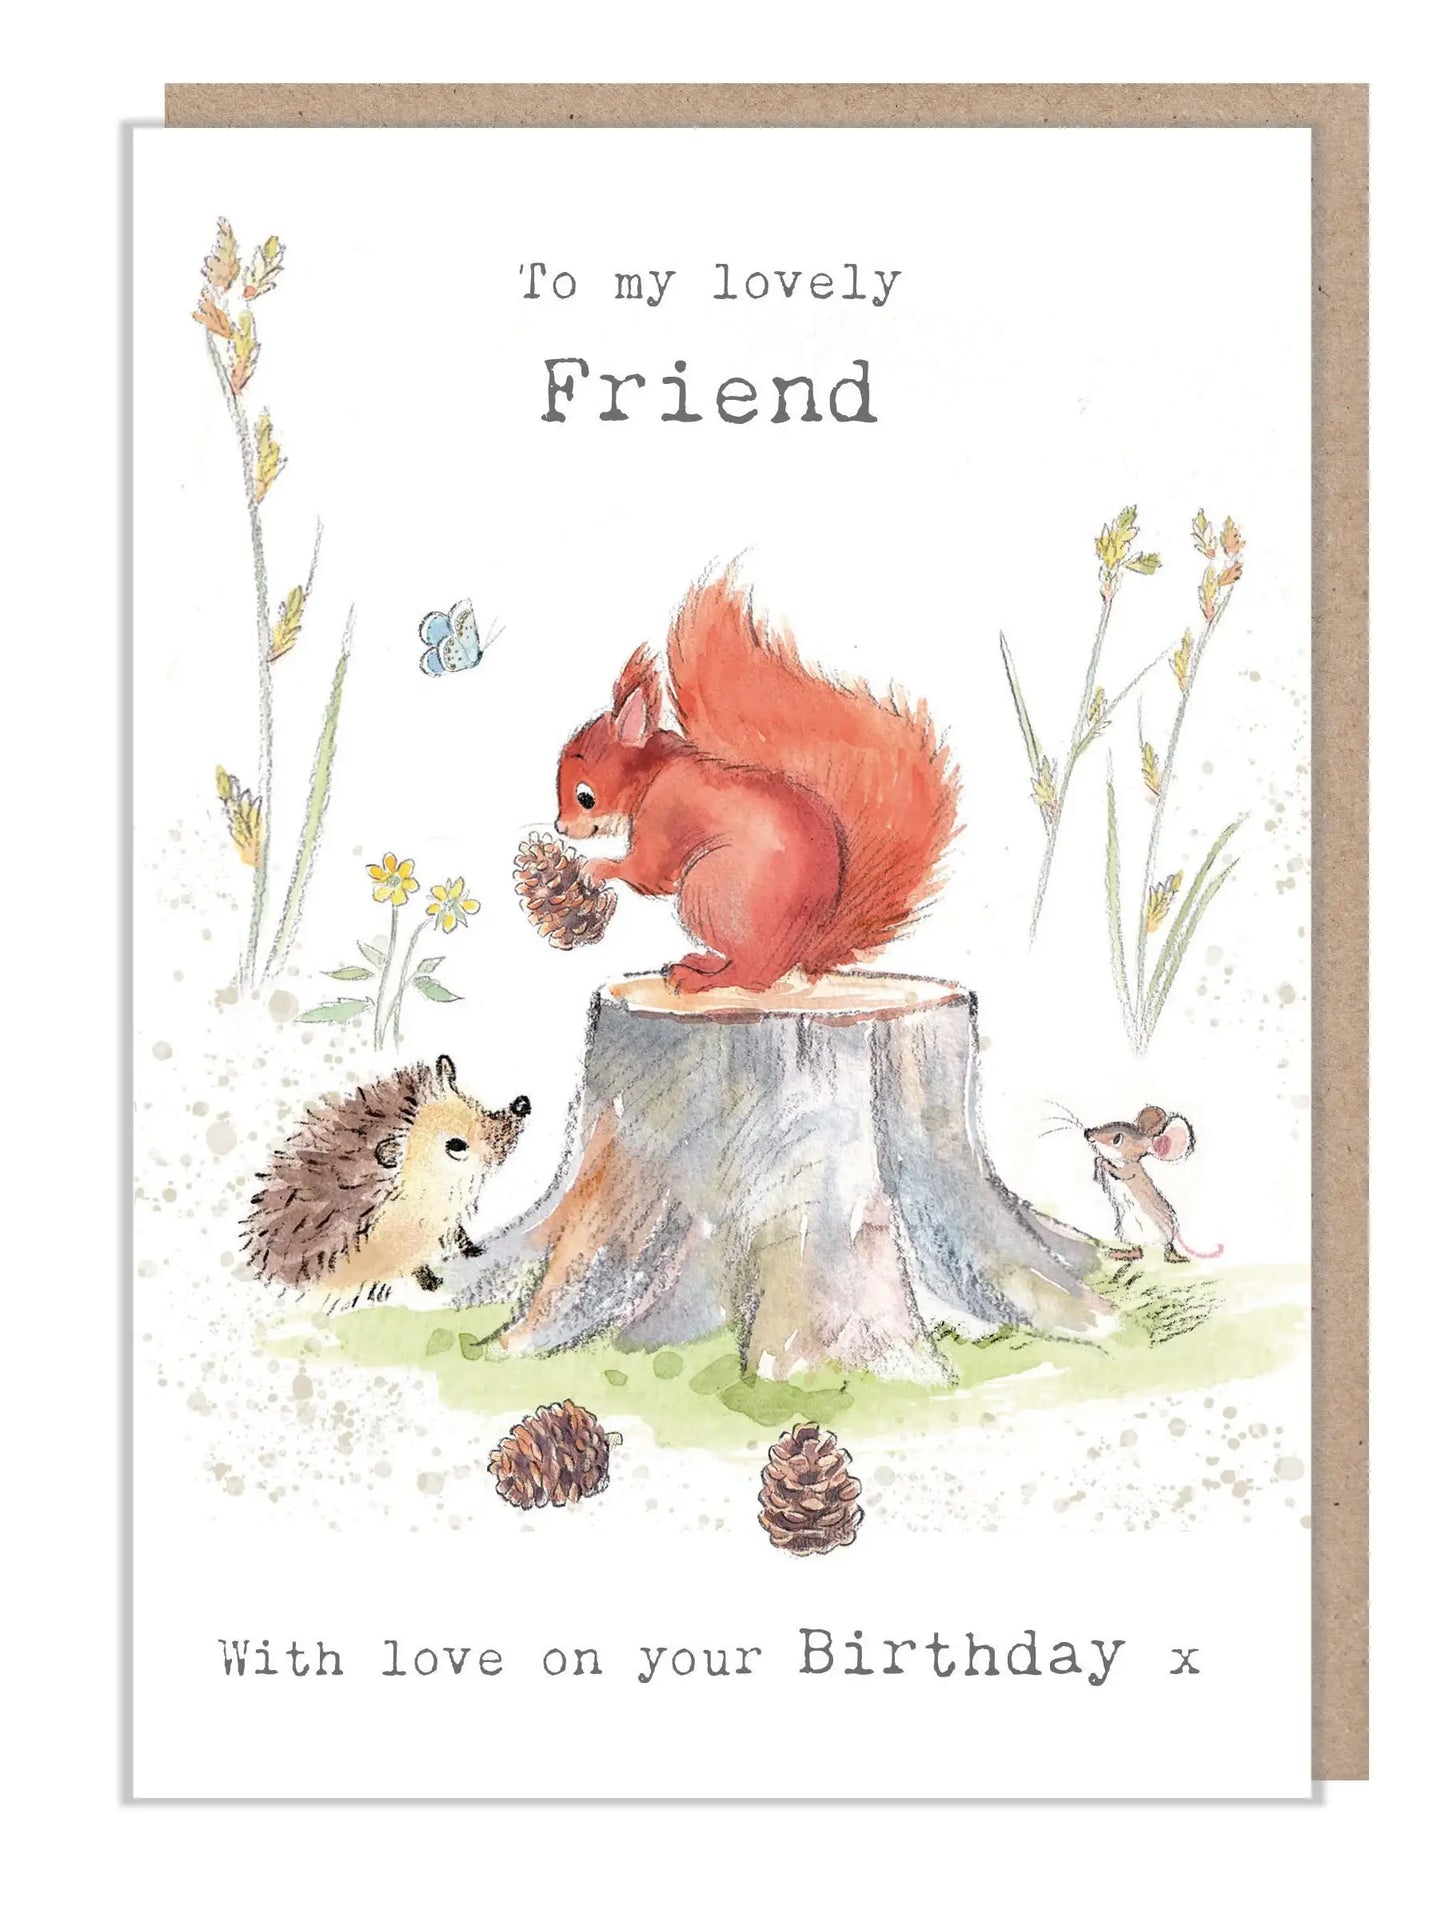 Paper Shed Design Ltd - Friend Birthday Card - Squirrel, Hedgehog And Mouse